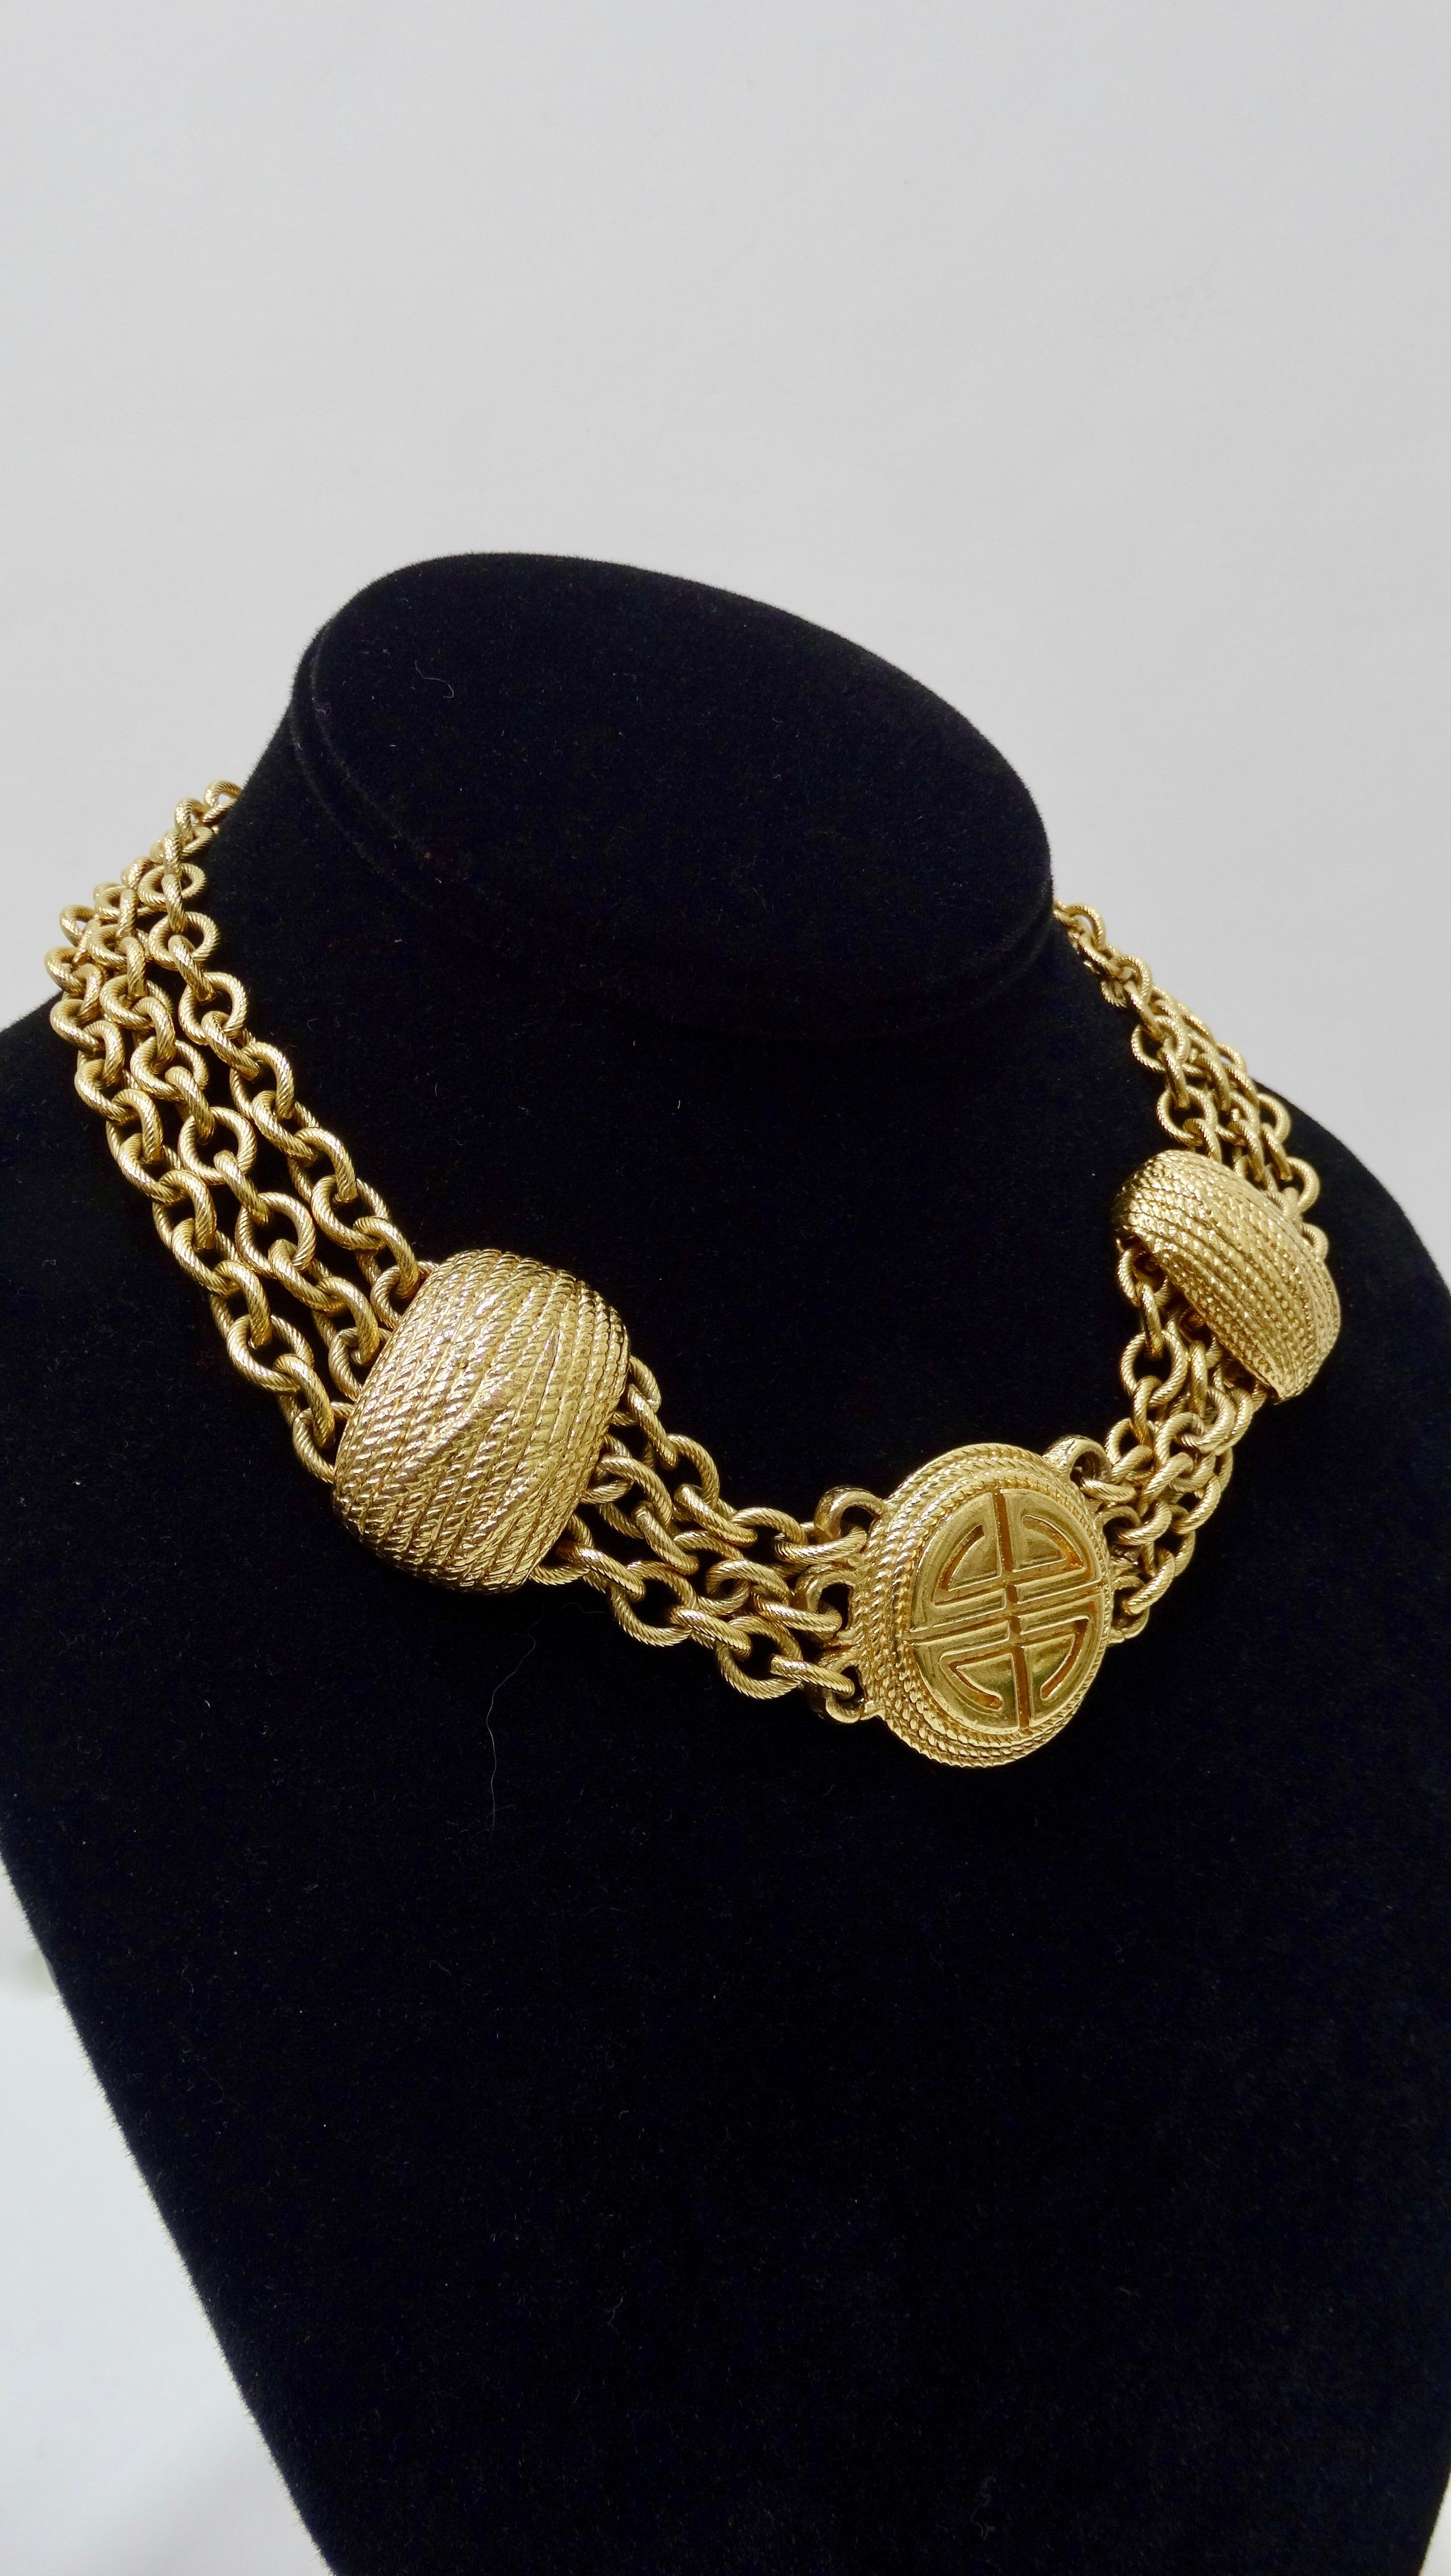 Get your Givenchy fix with this amazing choker! Circa 1980s, this multi-strand chain-link choker is gold toned and features a pendant embossed with the Givenchy logo. Includes an S-hook closure with adjustable length. A timeless piece, this necklace